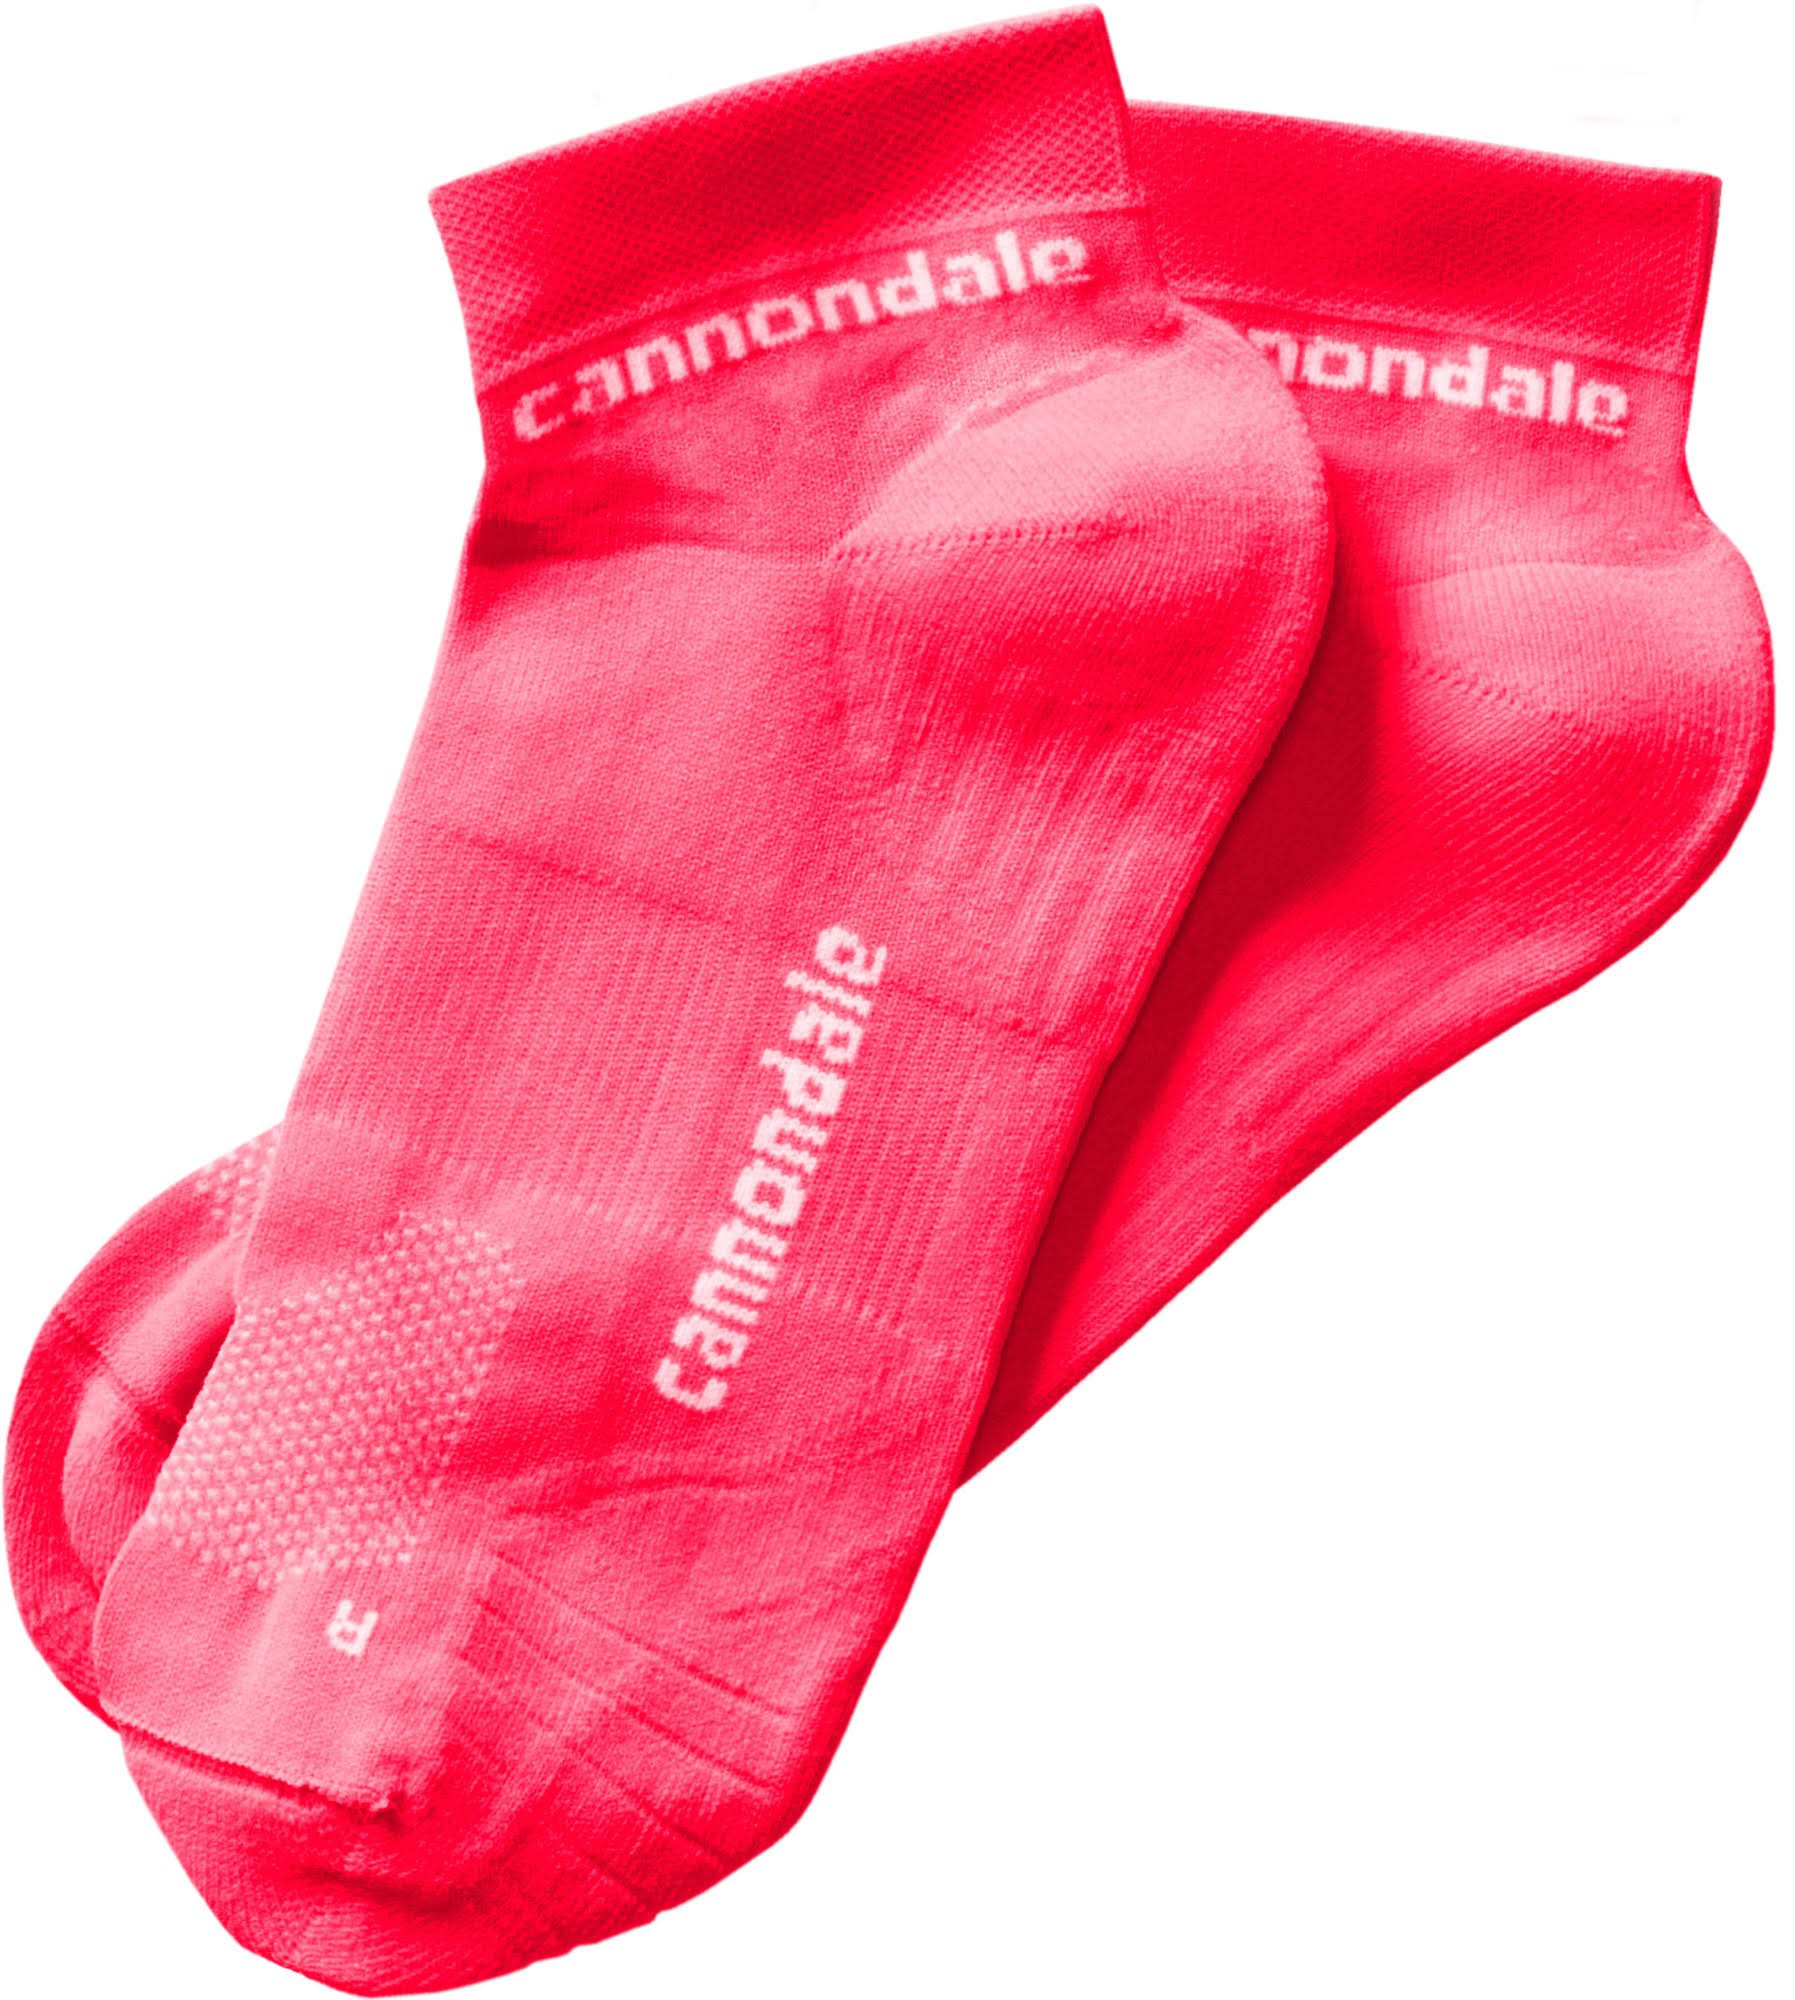 Cannondale Low Socks, Coral, X-Large